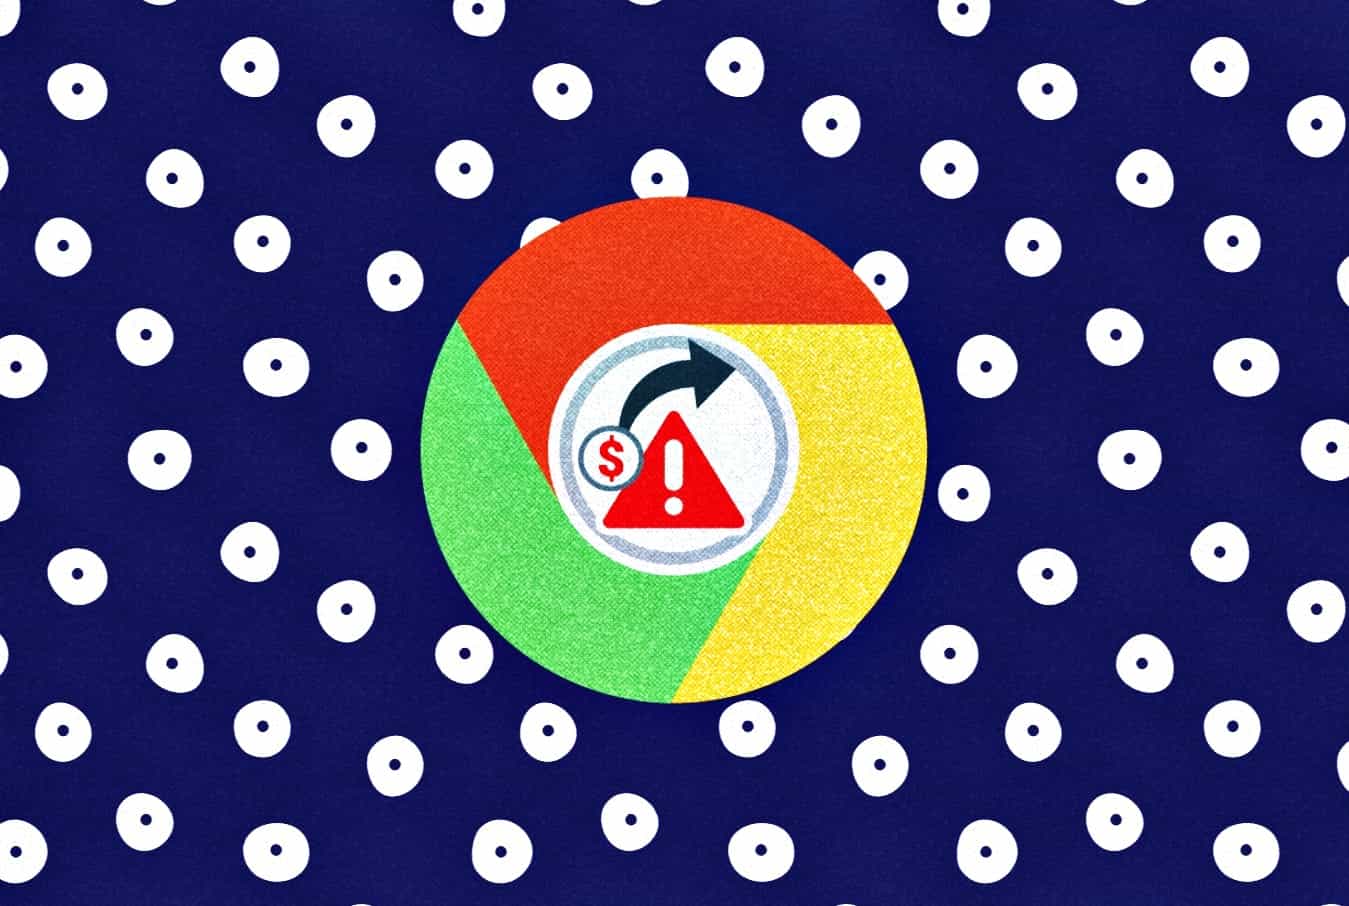 Chrome extensions with 80 million+ users found engaging in ad fraud